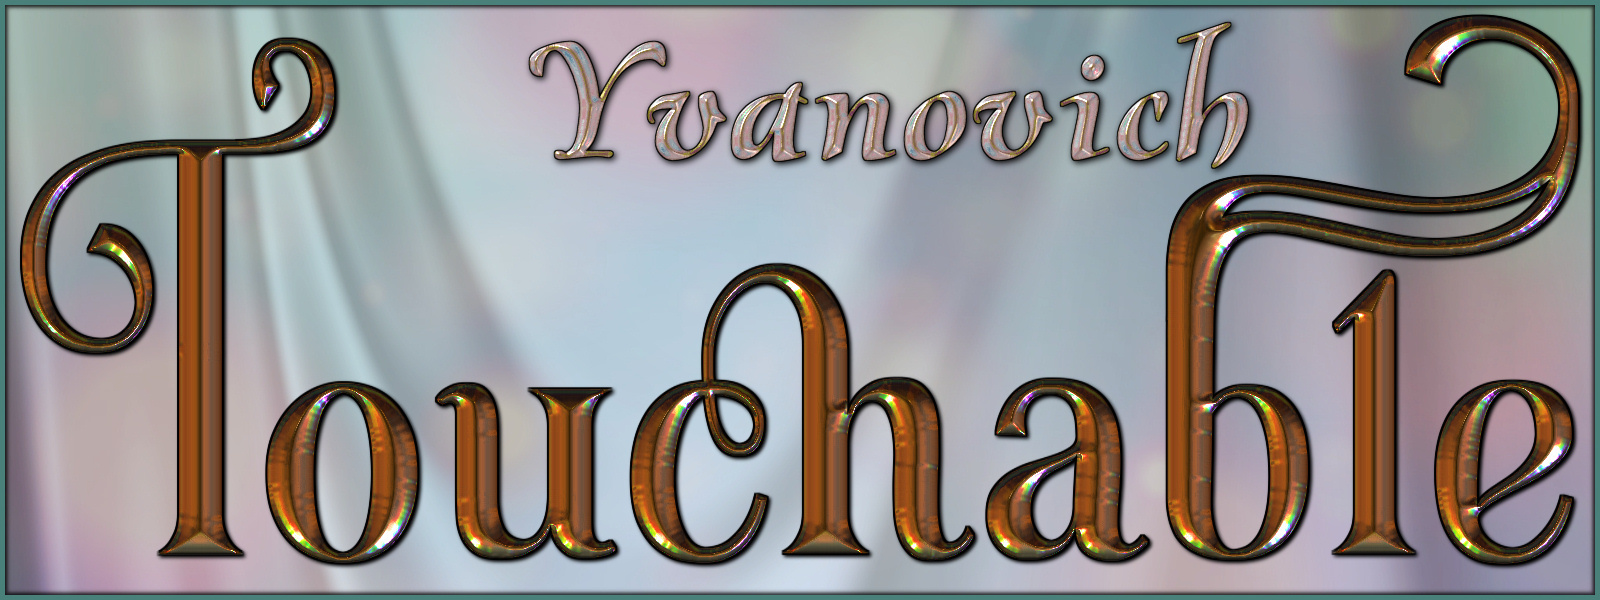 Touchable Yvanovich by: ~Wolfie~, 3D Models by Daz 3D